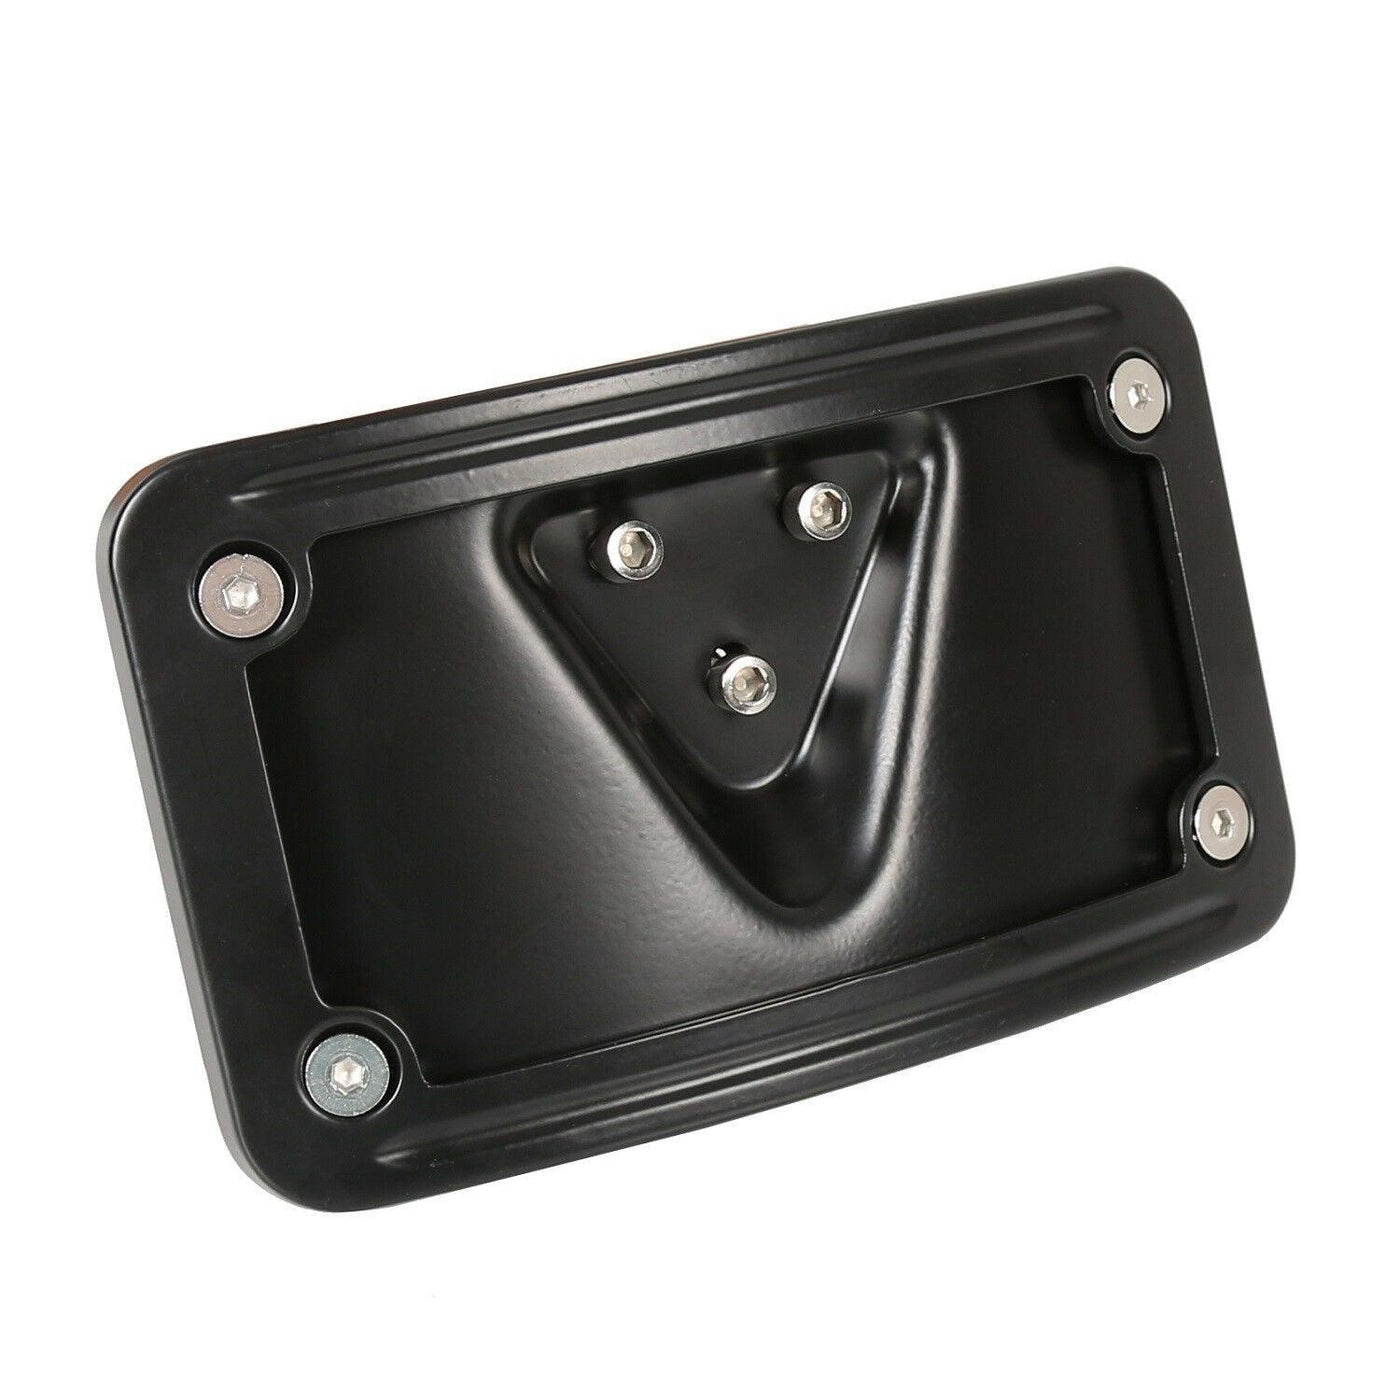 3 Hole Curved Laydown License Plate Mount Bracket w/ Frame For Harley Davidson - Moto Life Products